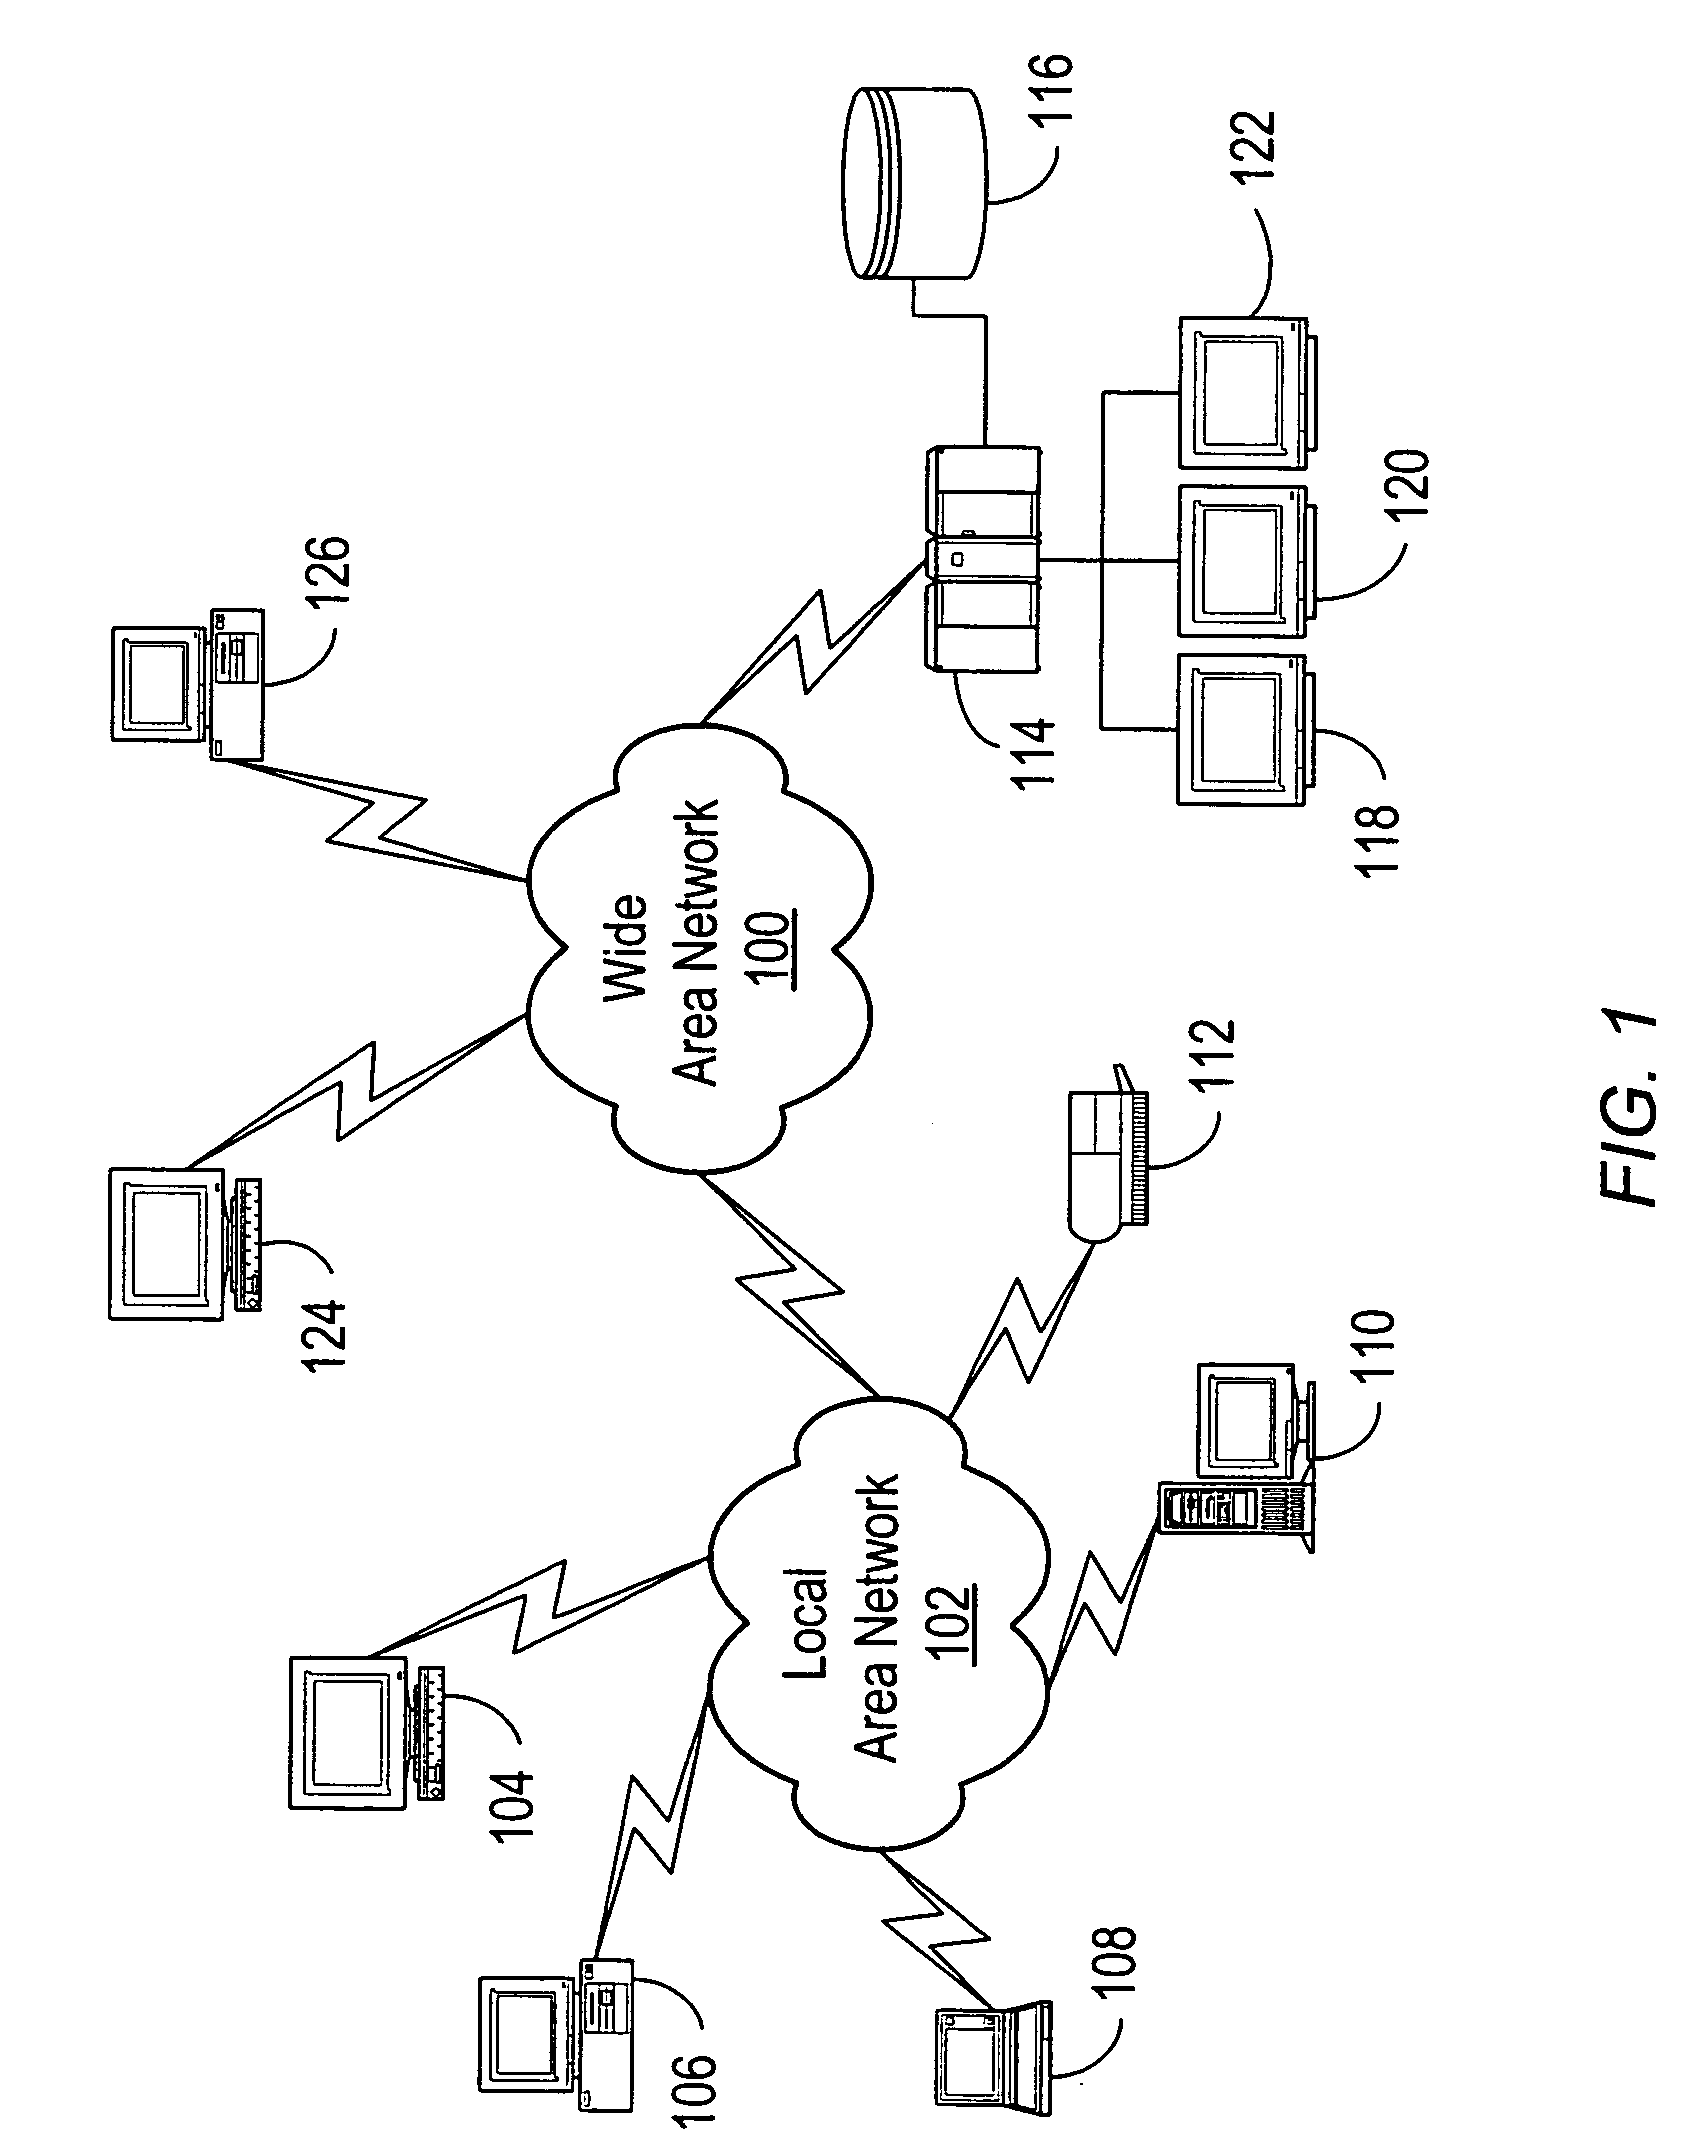 Method for image processing and contour assessment of the heart